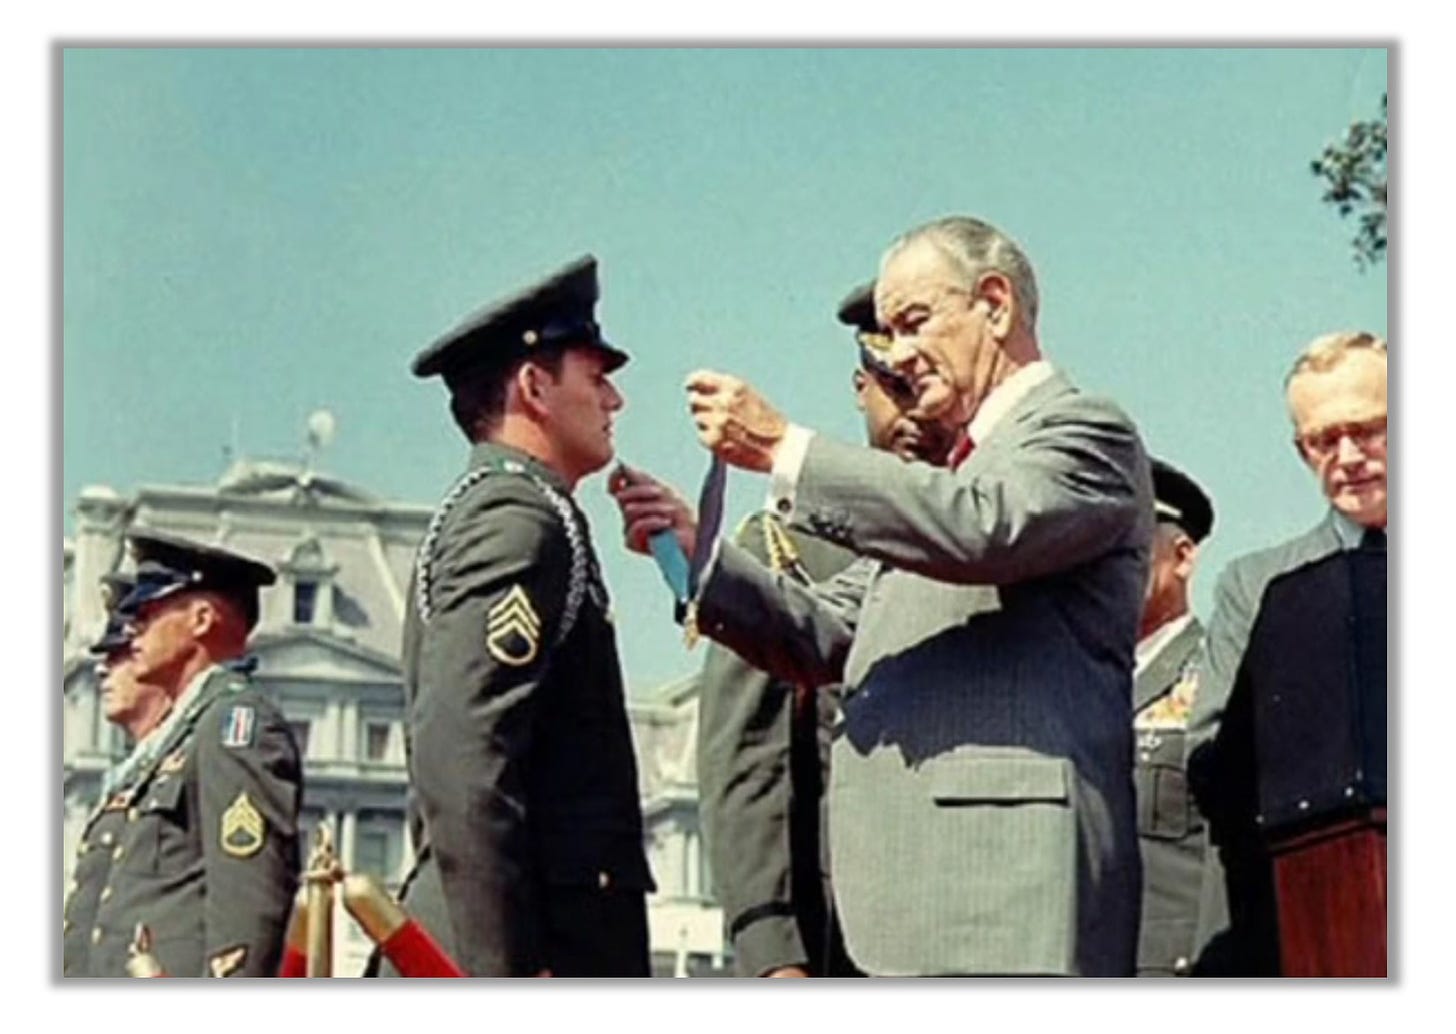 Ken Stumpf stands at attention as LBJ hangs a Medal of Honor around his neck.